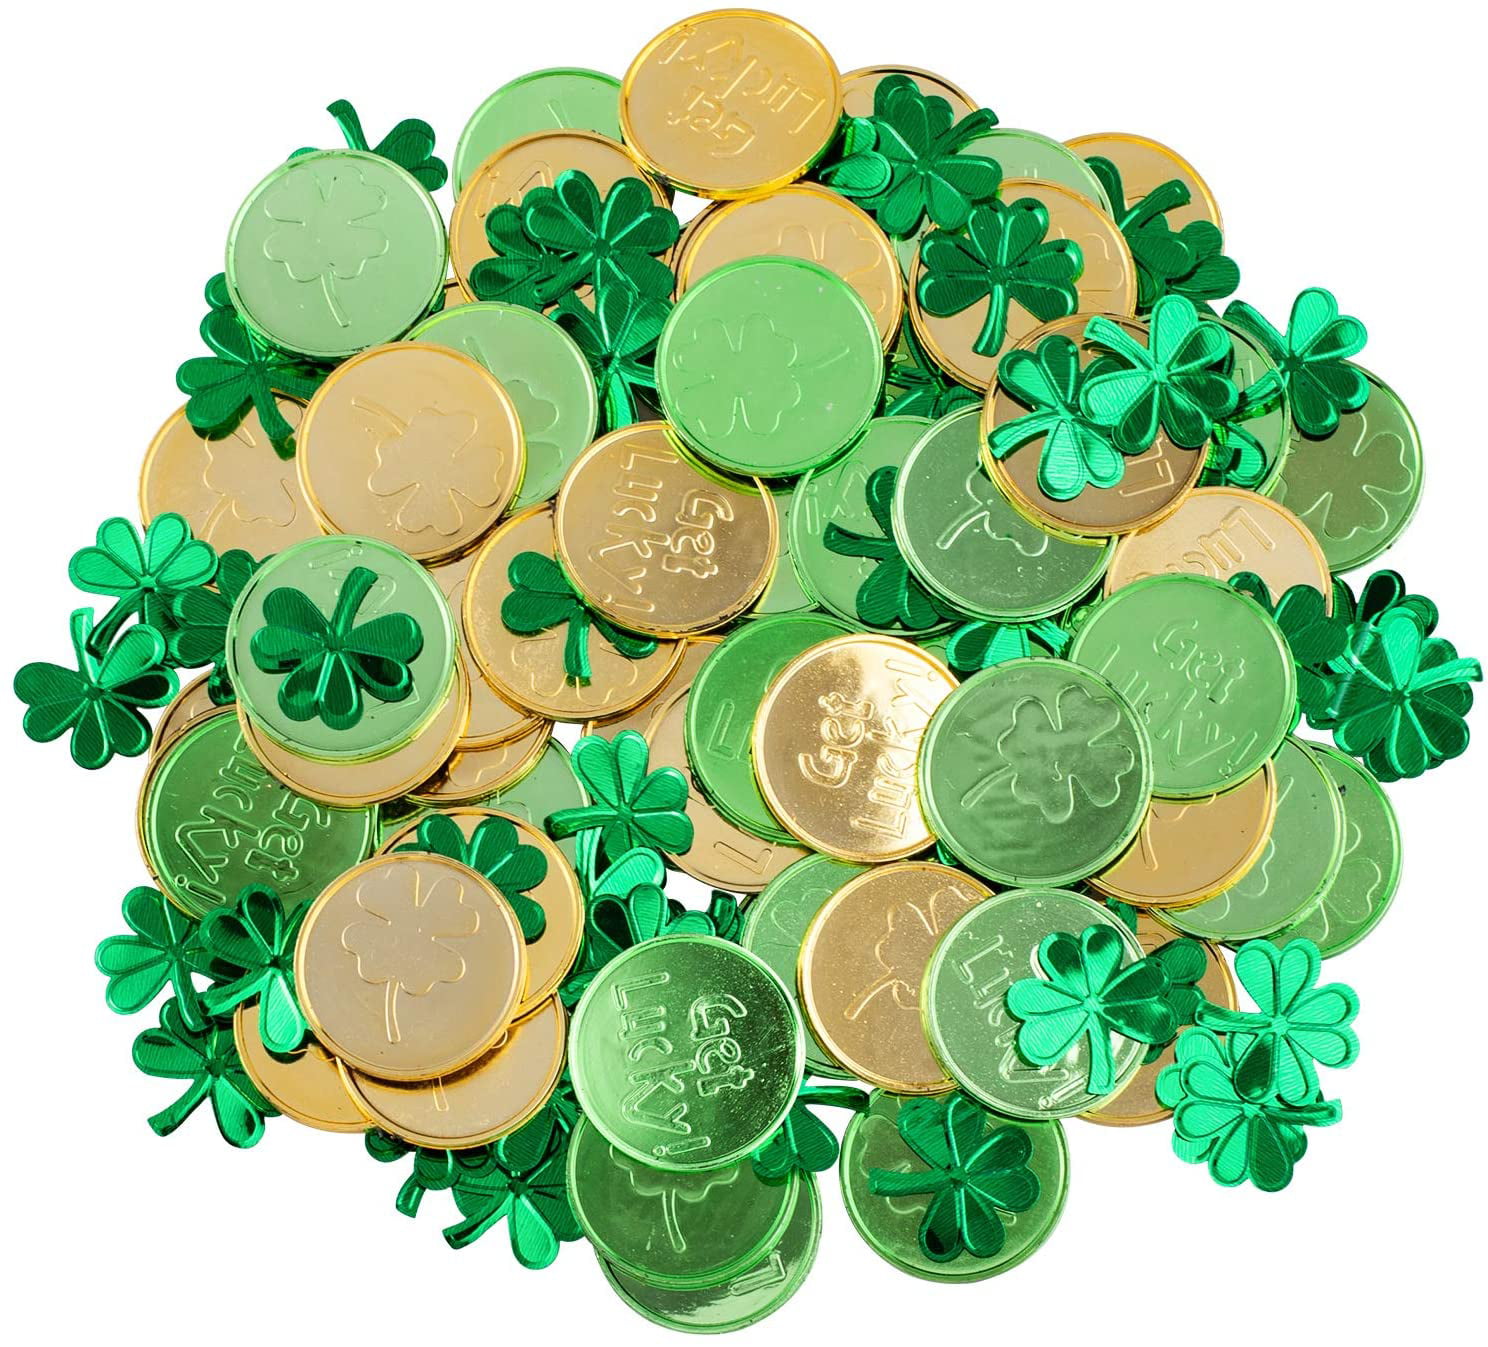 Civaner 200 Pieces St Green Patrick's Day Coins Small Plastic Coins Shamrock Coins Plastic Lucky Shamrock Coins Table Sprinkles for Party Supplies St Patrick's Day Decor 